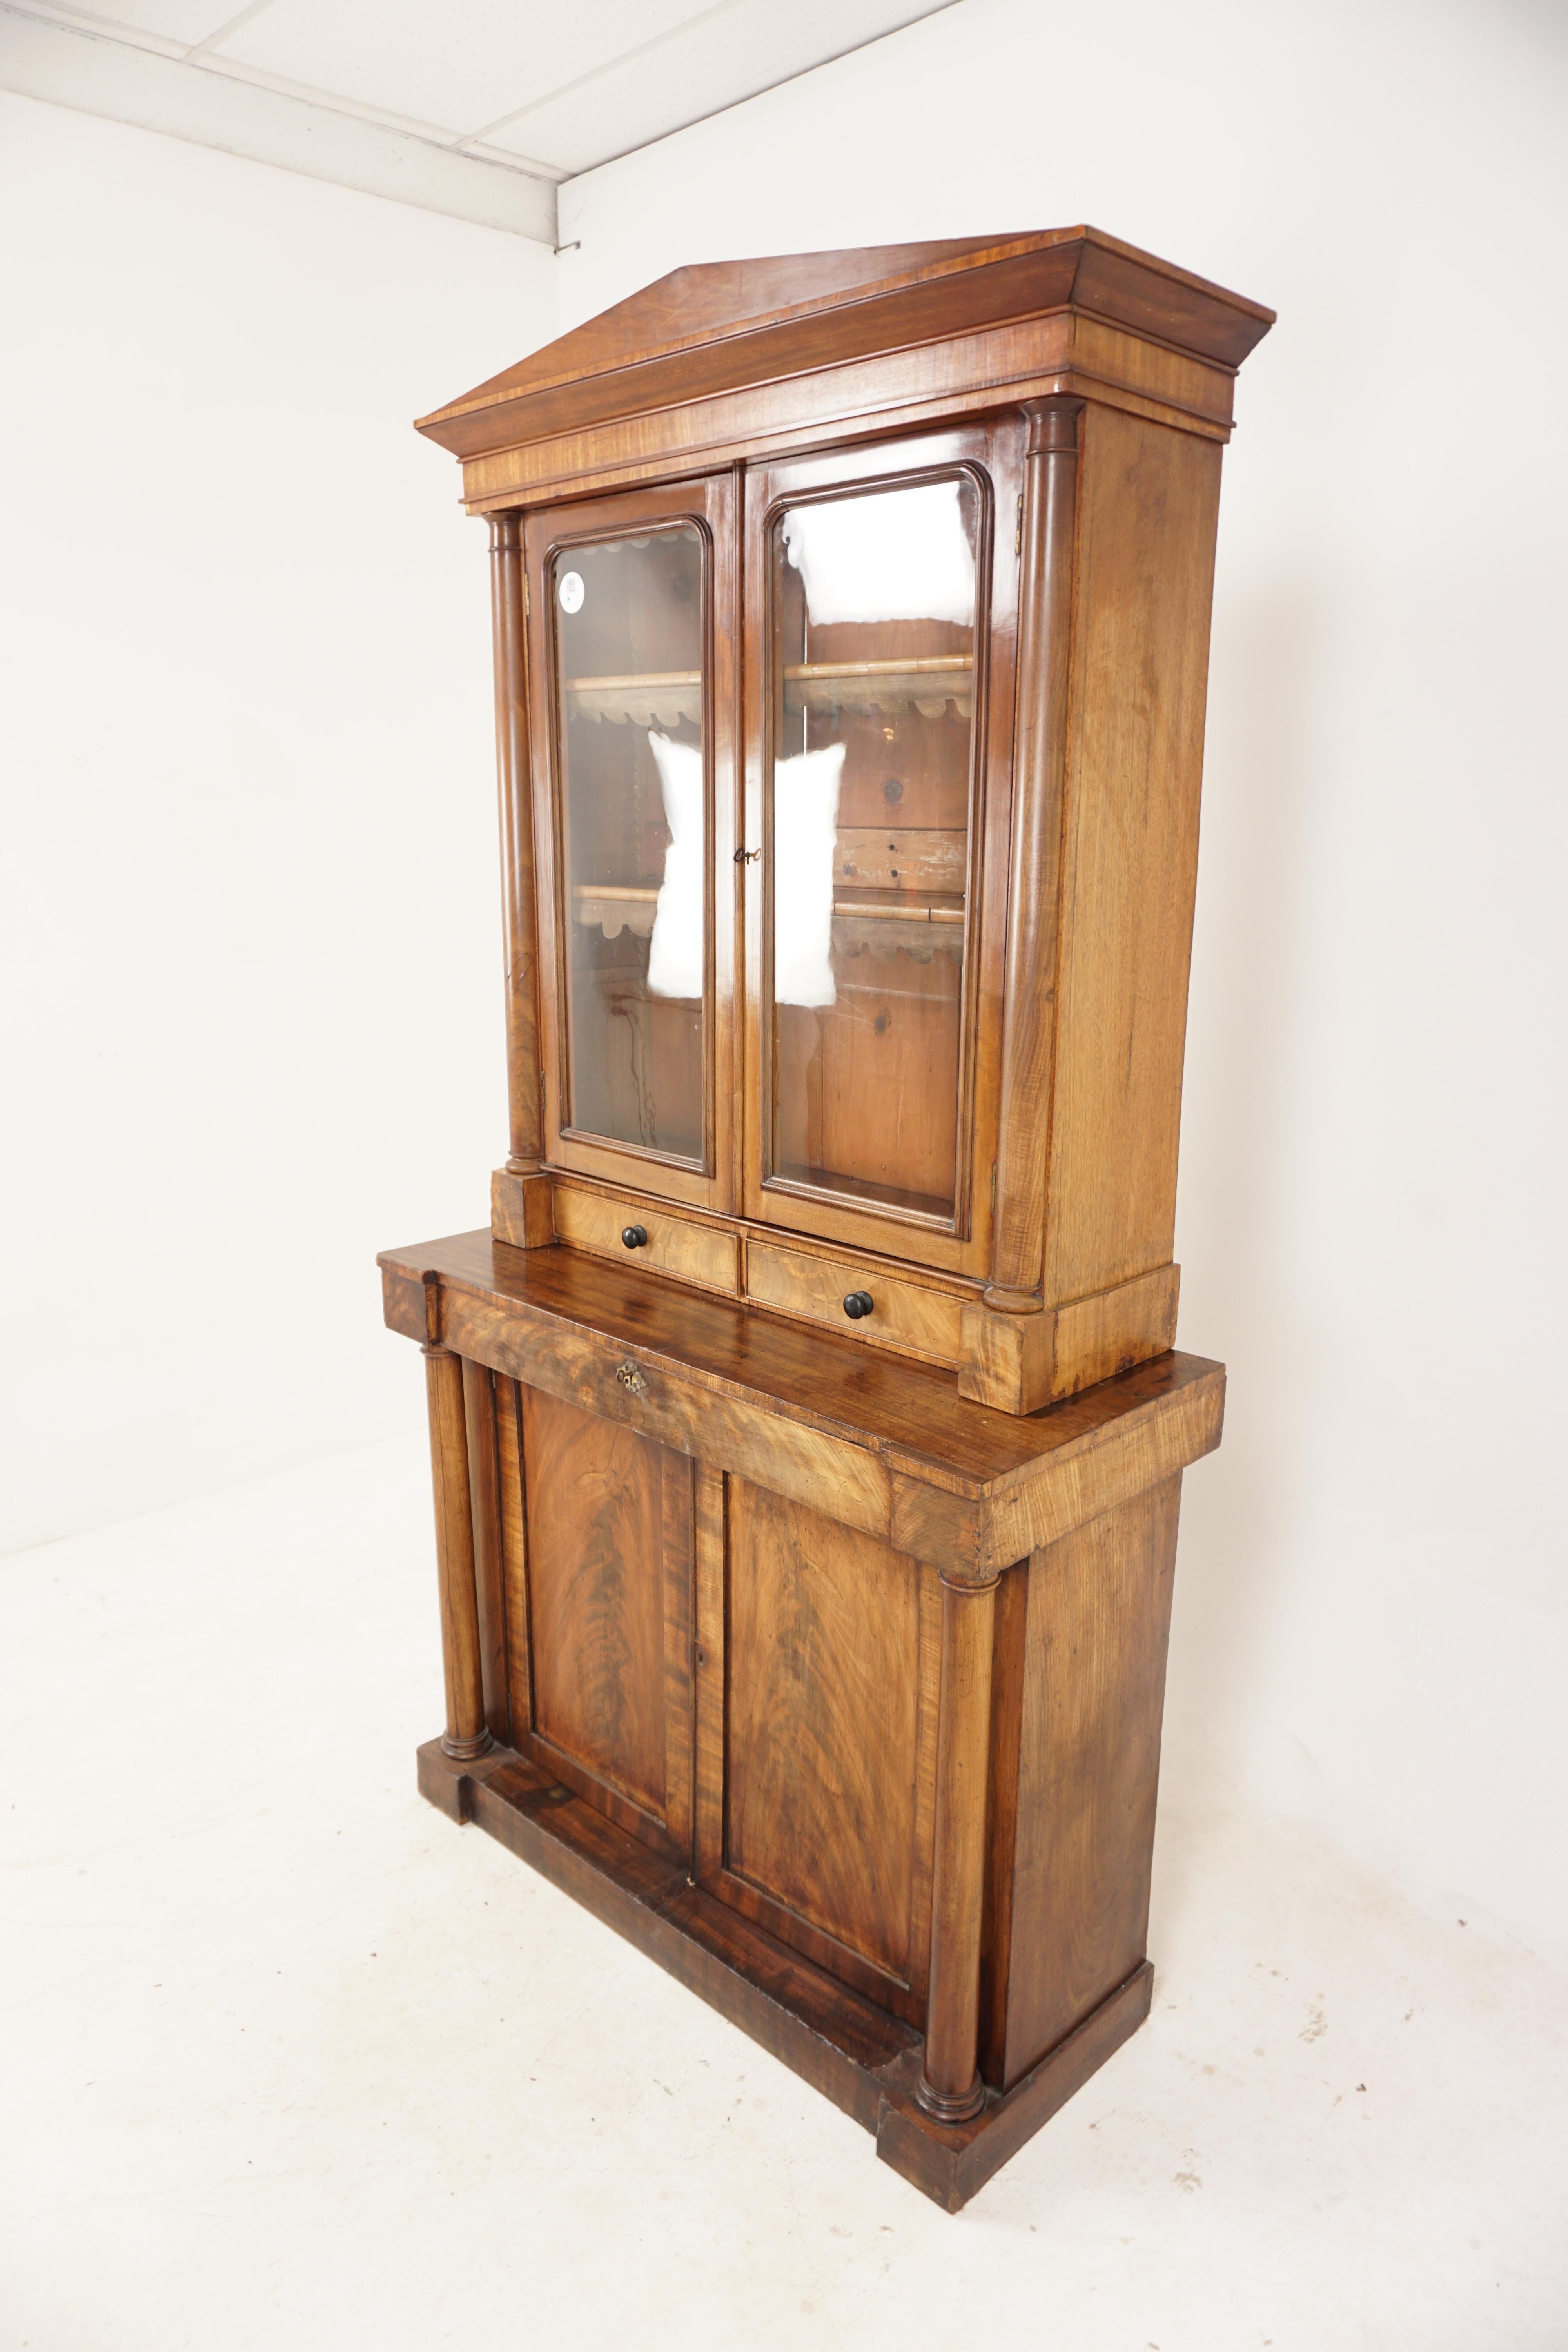 Antique Victorian four door cabinet bookcase display cabinet, H909

Scotland (regency period 1811-1820)
Solid walnut and veneers
Original finish
Simple moulded architectural cornice
With plain frieze below
Pair of original glass doors
With 3